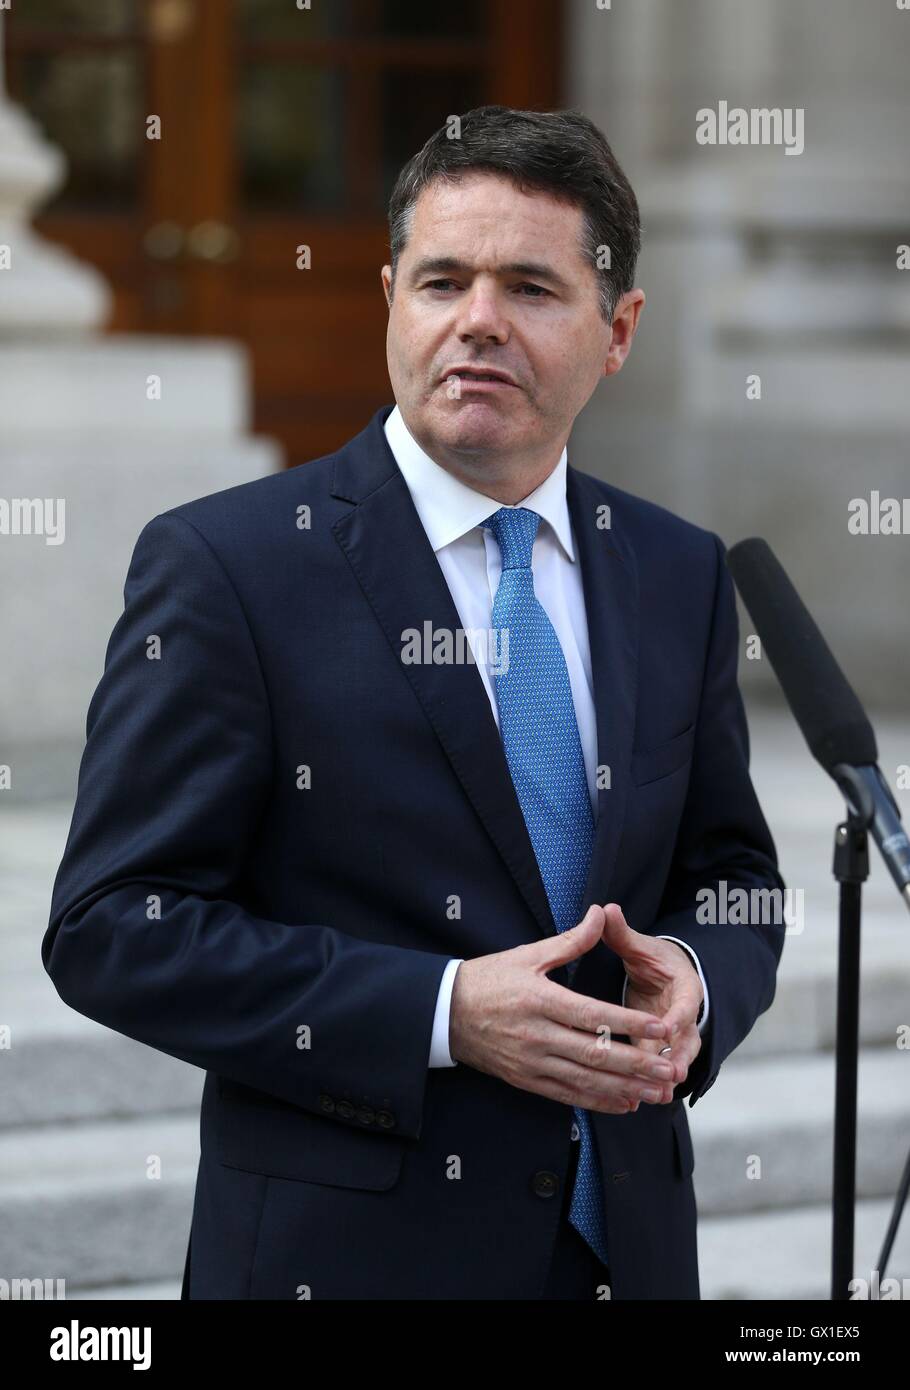 Minister for Public Expenditure and Reform, Paschal Donohoe, speaks in response to the Nama report, as the Irish government is to order an inquiry into the controversial £1.2 billion sale of Northern Ireland property assets by bad bank Nama, outside Government buildings in Dublin. Stock Photo